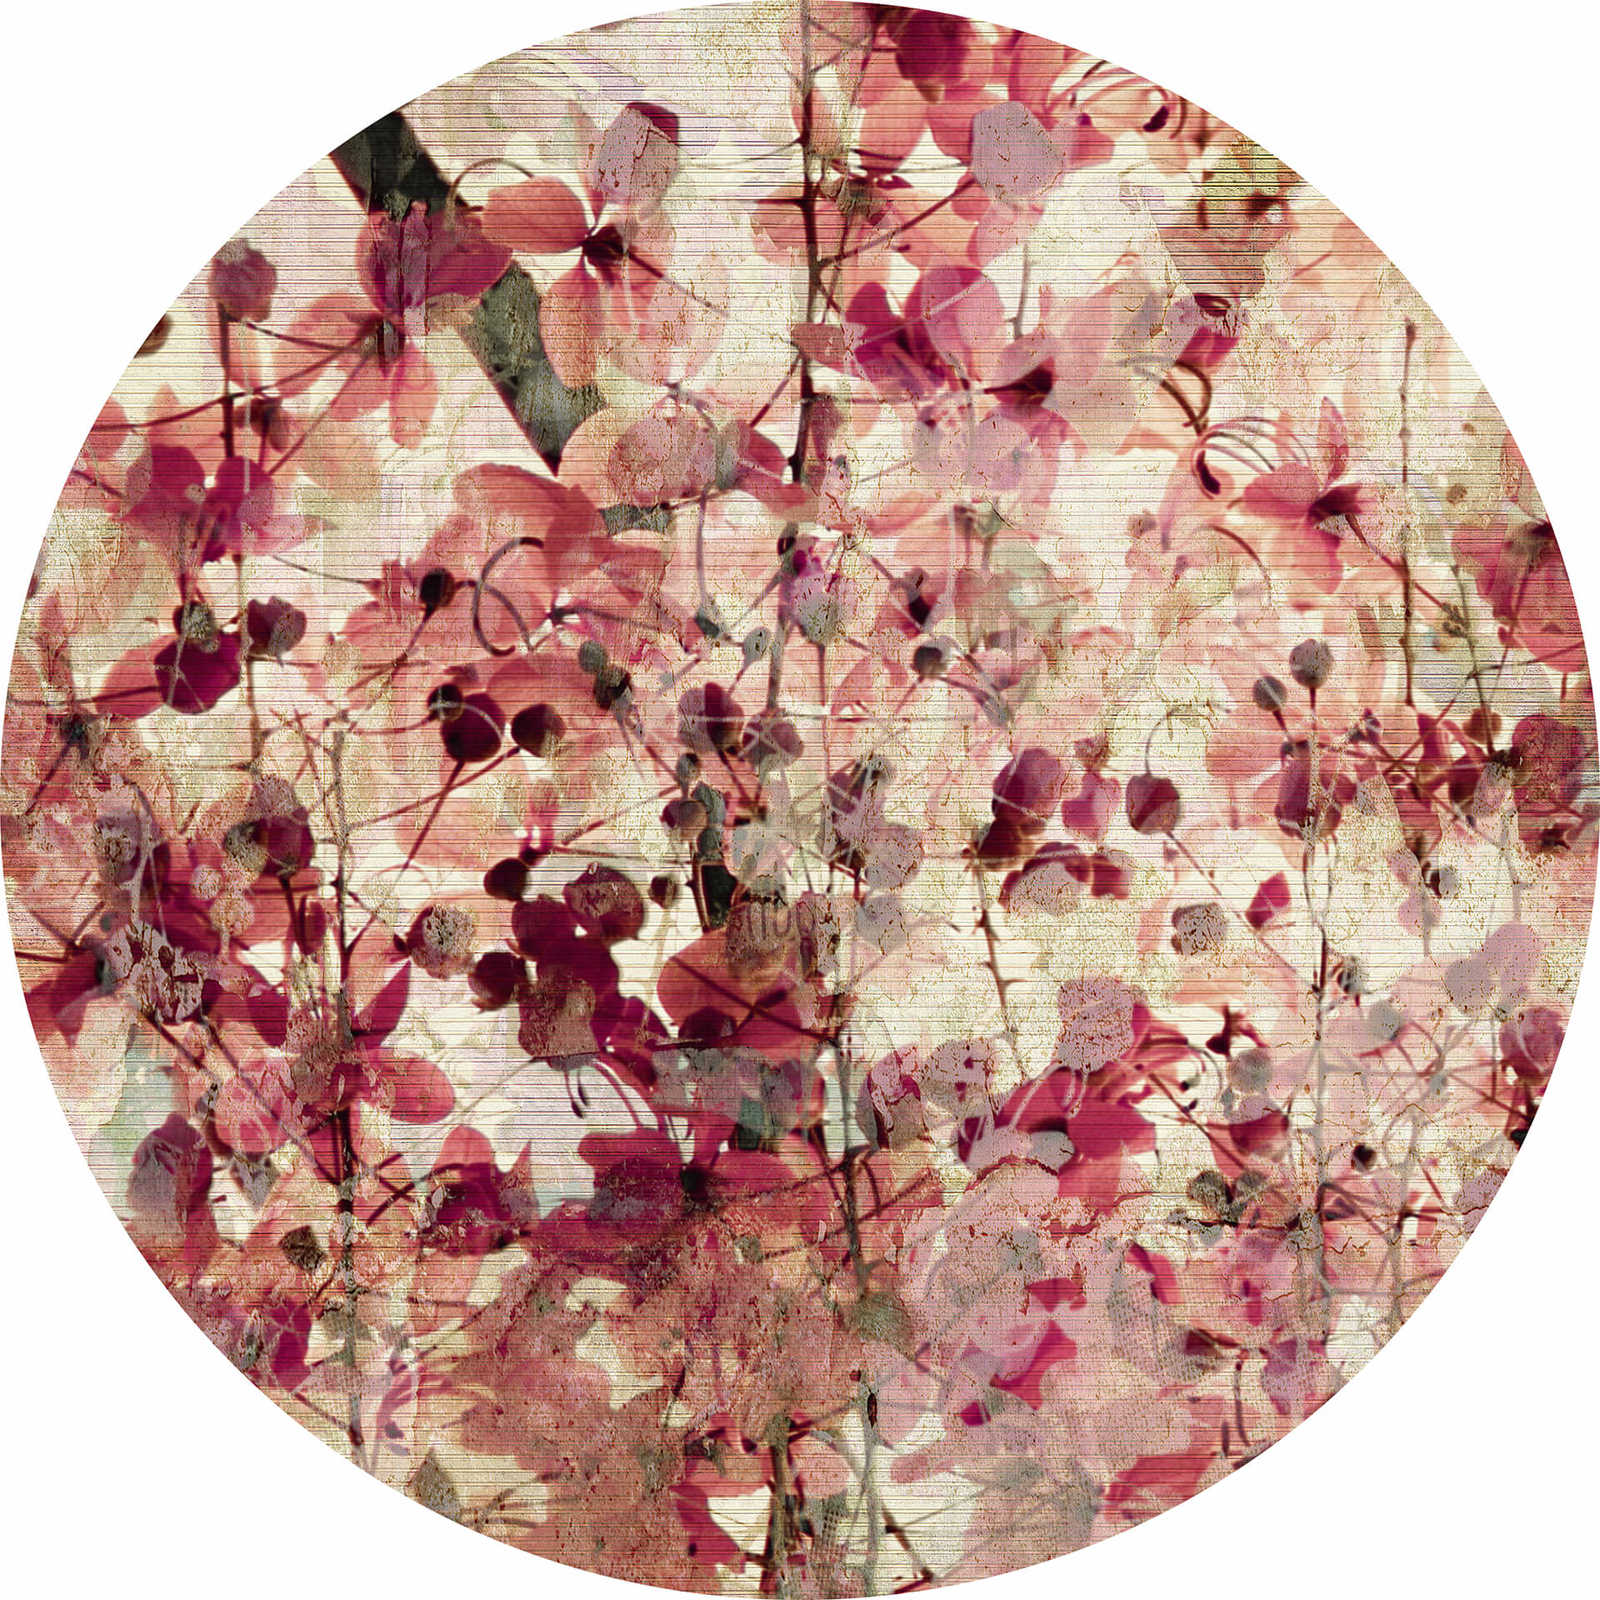         Vintage style round floral pattern mural
    